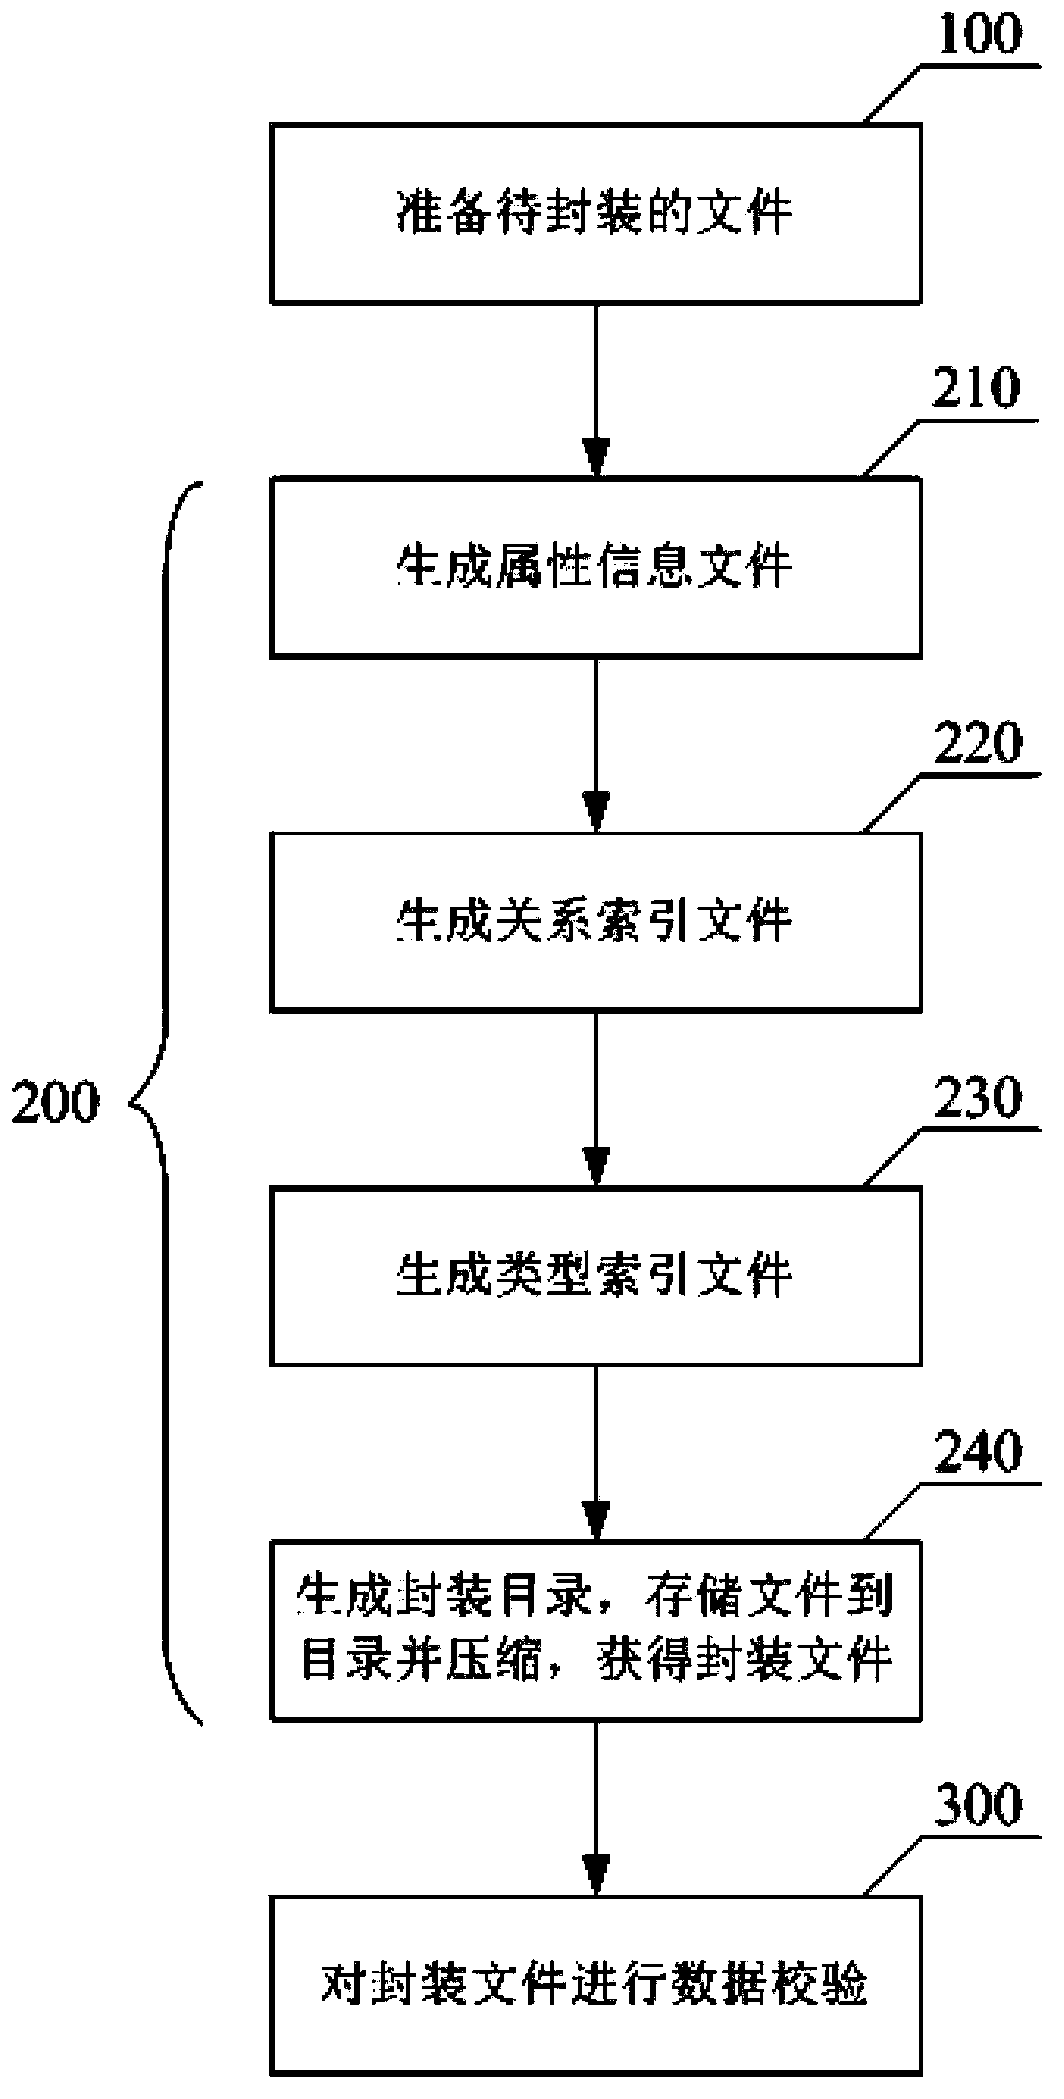 Method for encapsulating XBRL (extensible business reporting language) instance documents